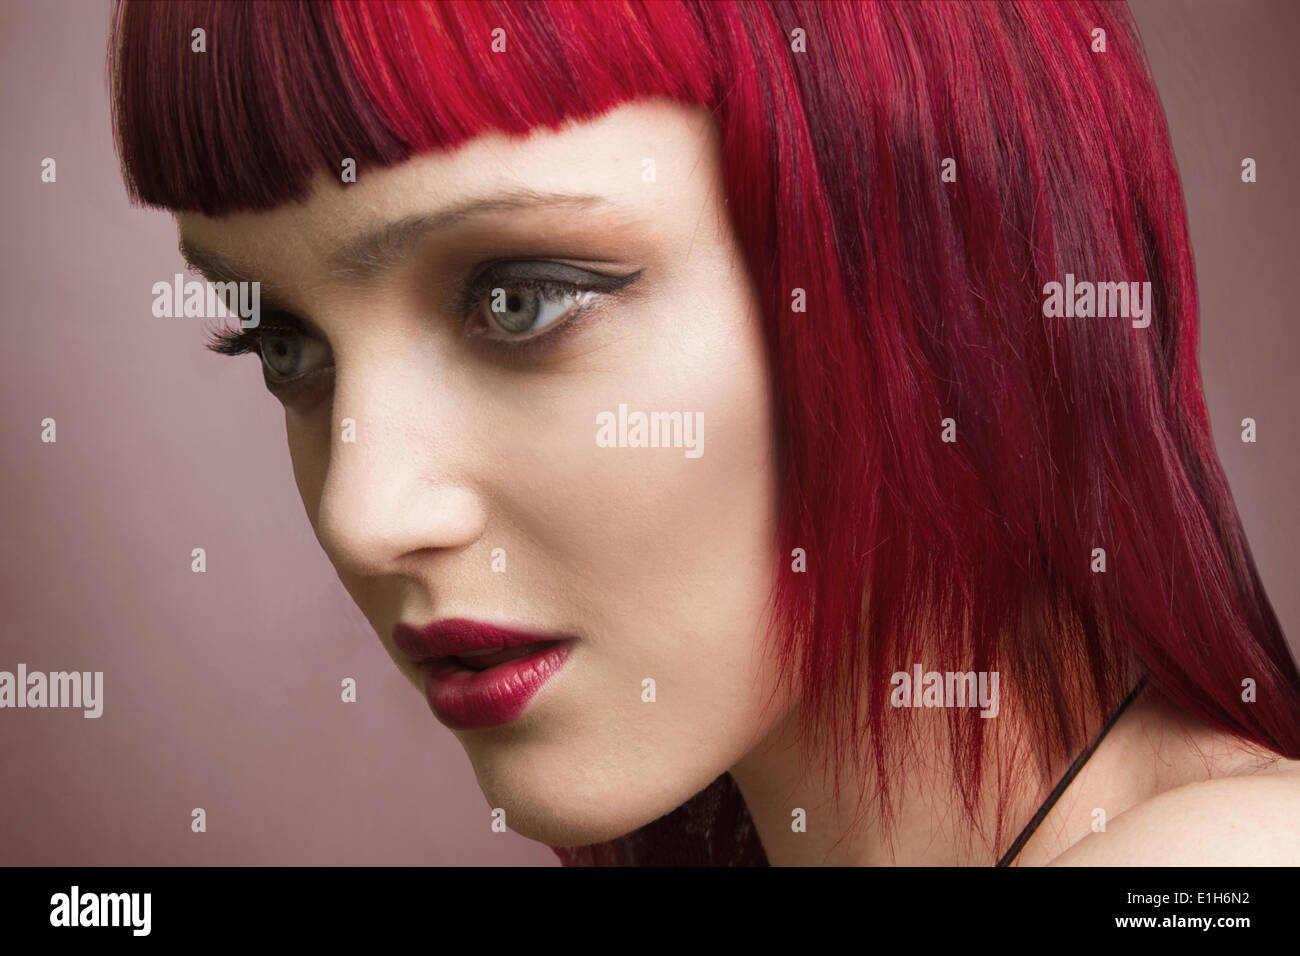 Close up studio portrait of young woman with pink hair Stock Photo